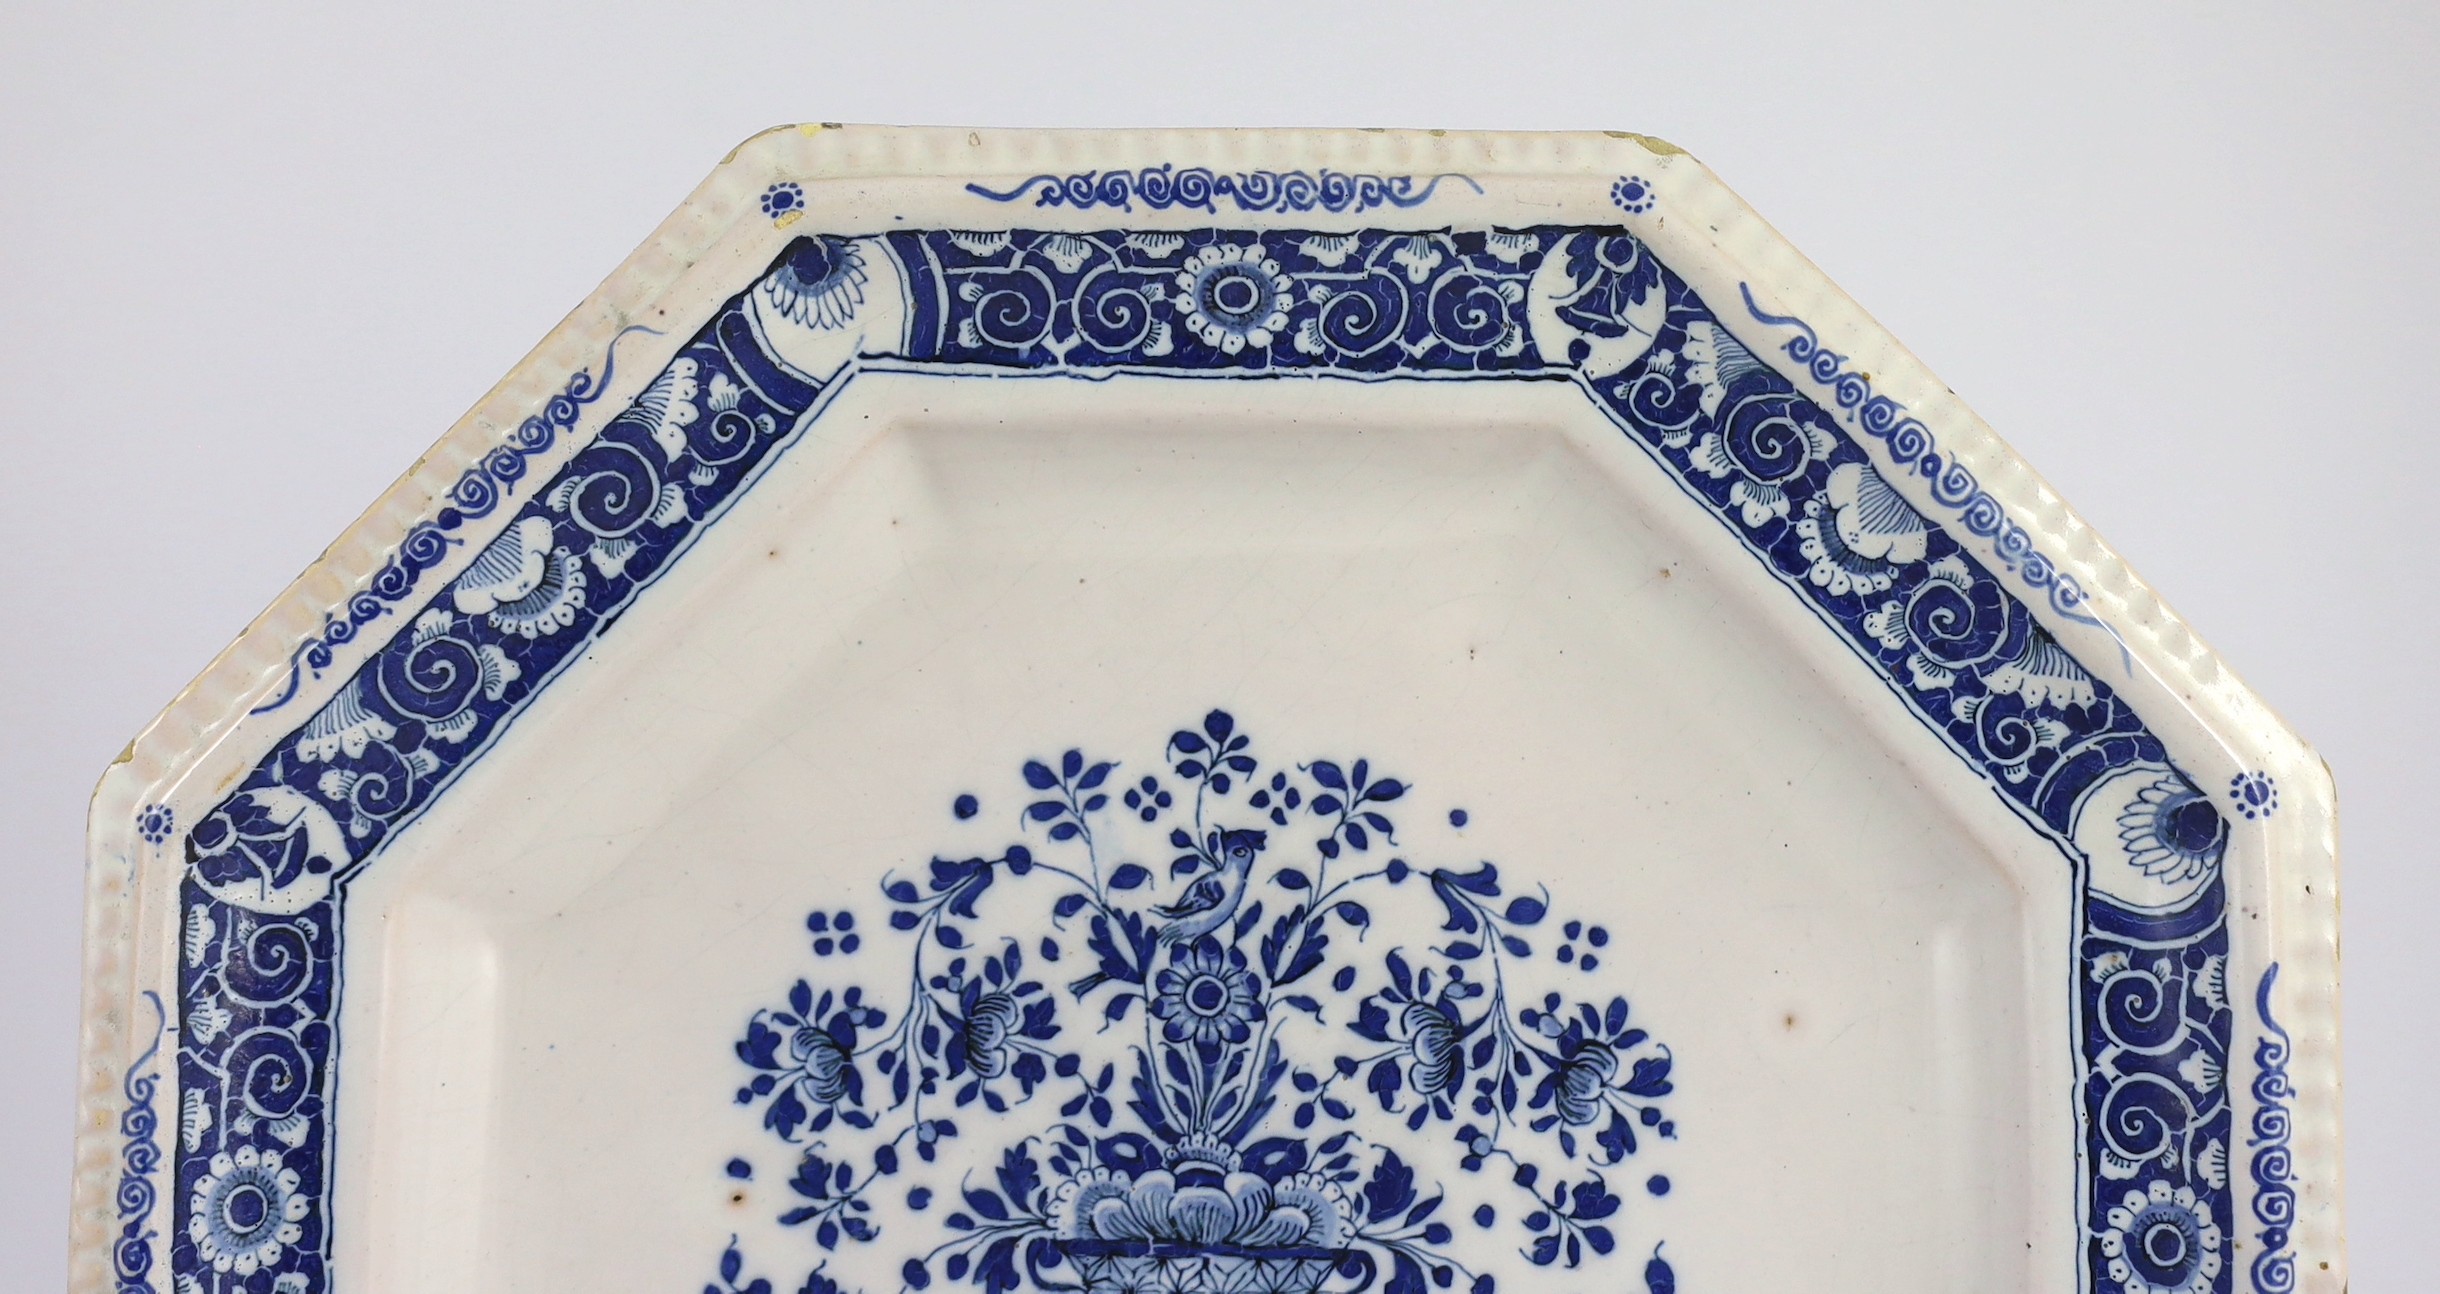 A large Strasbourg faience octagonal dish, c.1720-40, painted in blue with a basket of flowers, - Image 2 of 6